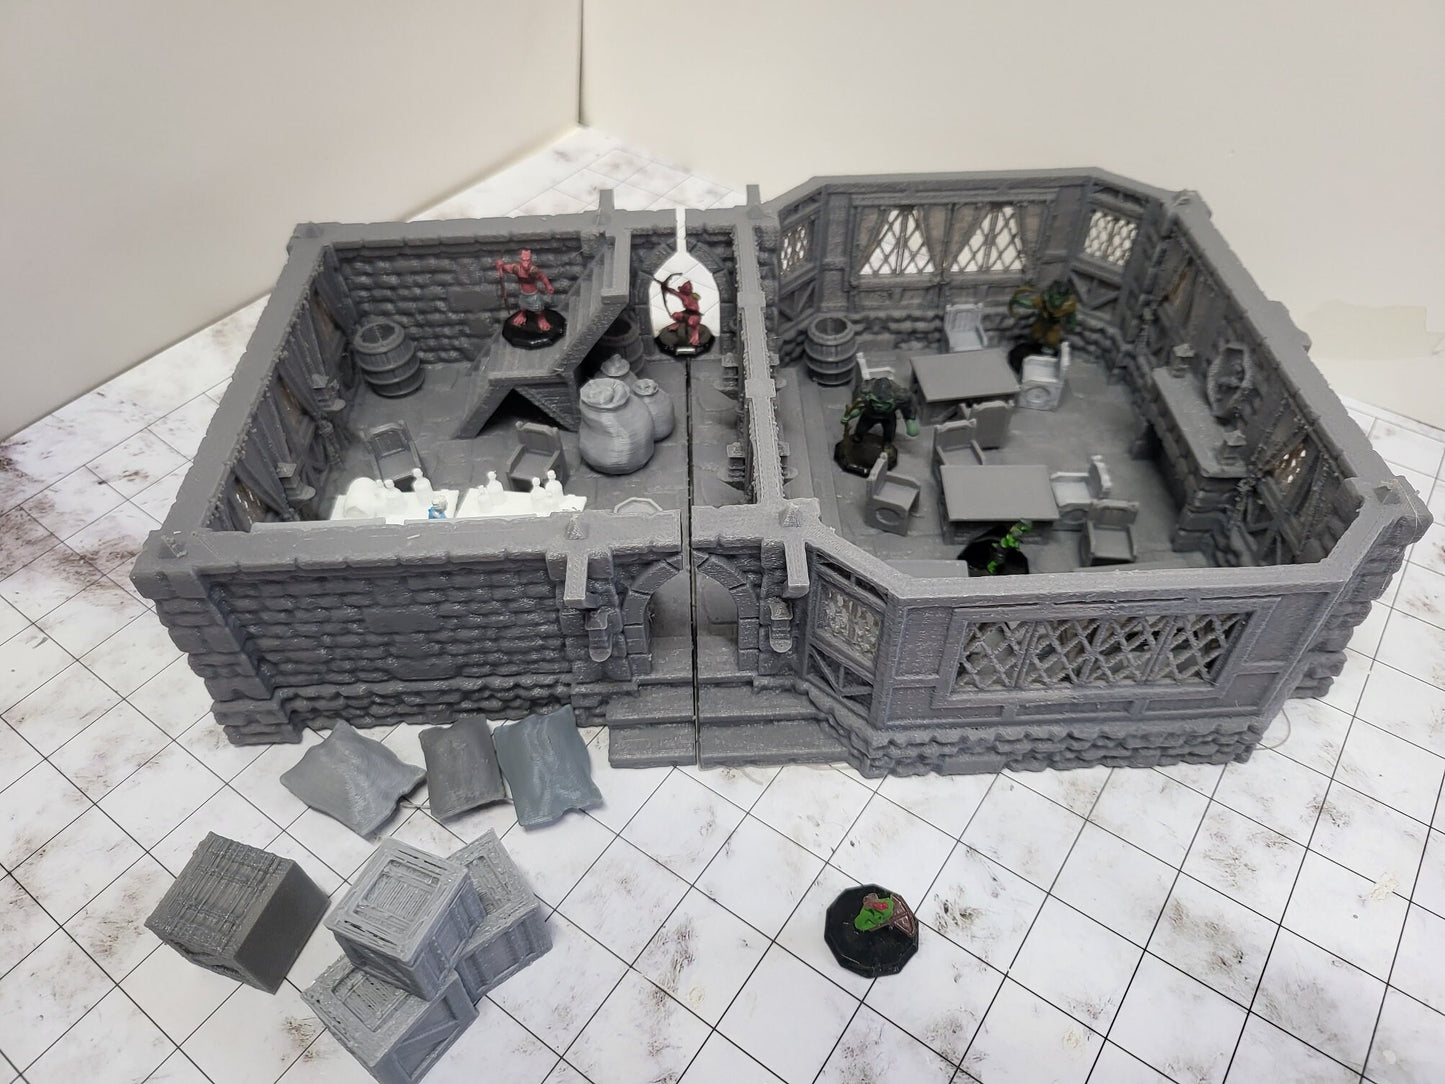 Brothel, Swan, House, Sex, Dnd, dungeons and dragons, town, companion, campaign, tabletope scenery, tabletop games, tabletop terrain, terrain, village whore house, whore house, house, tavern, adventure, bar, pub